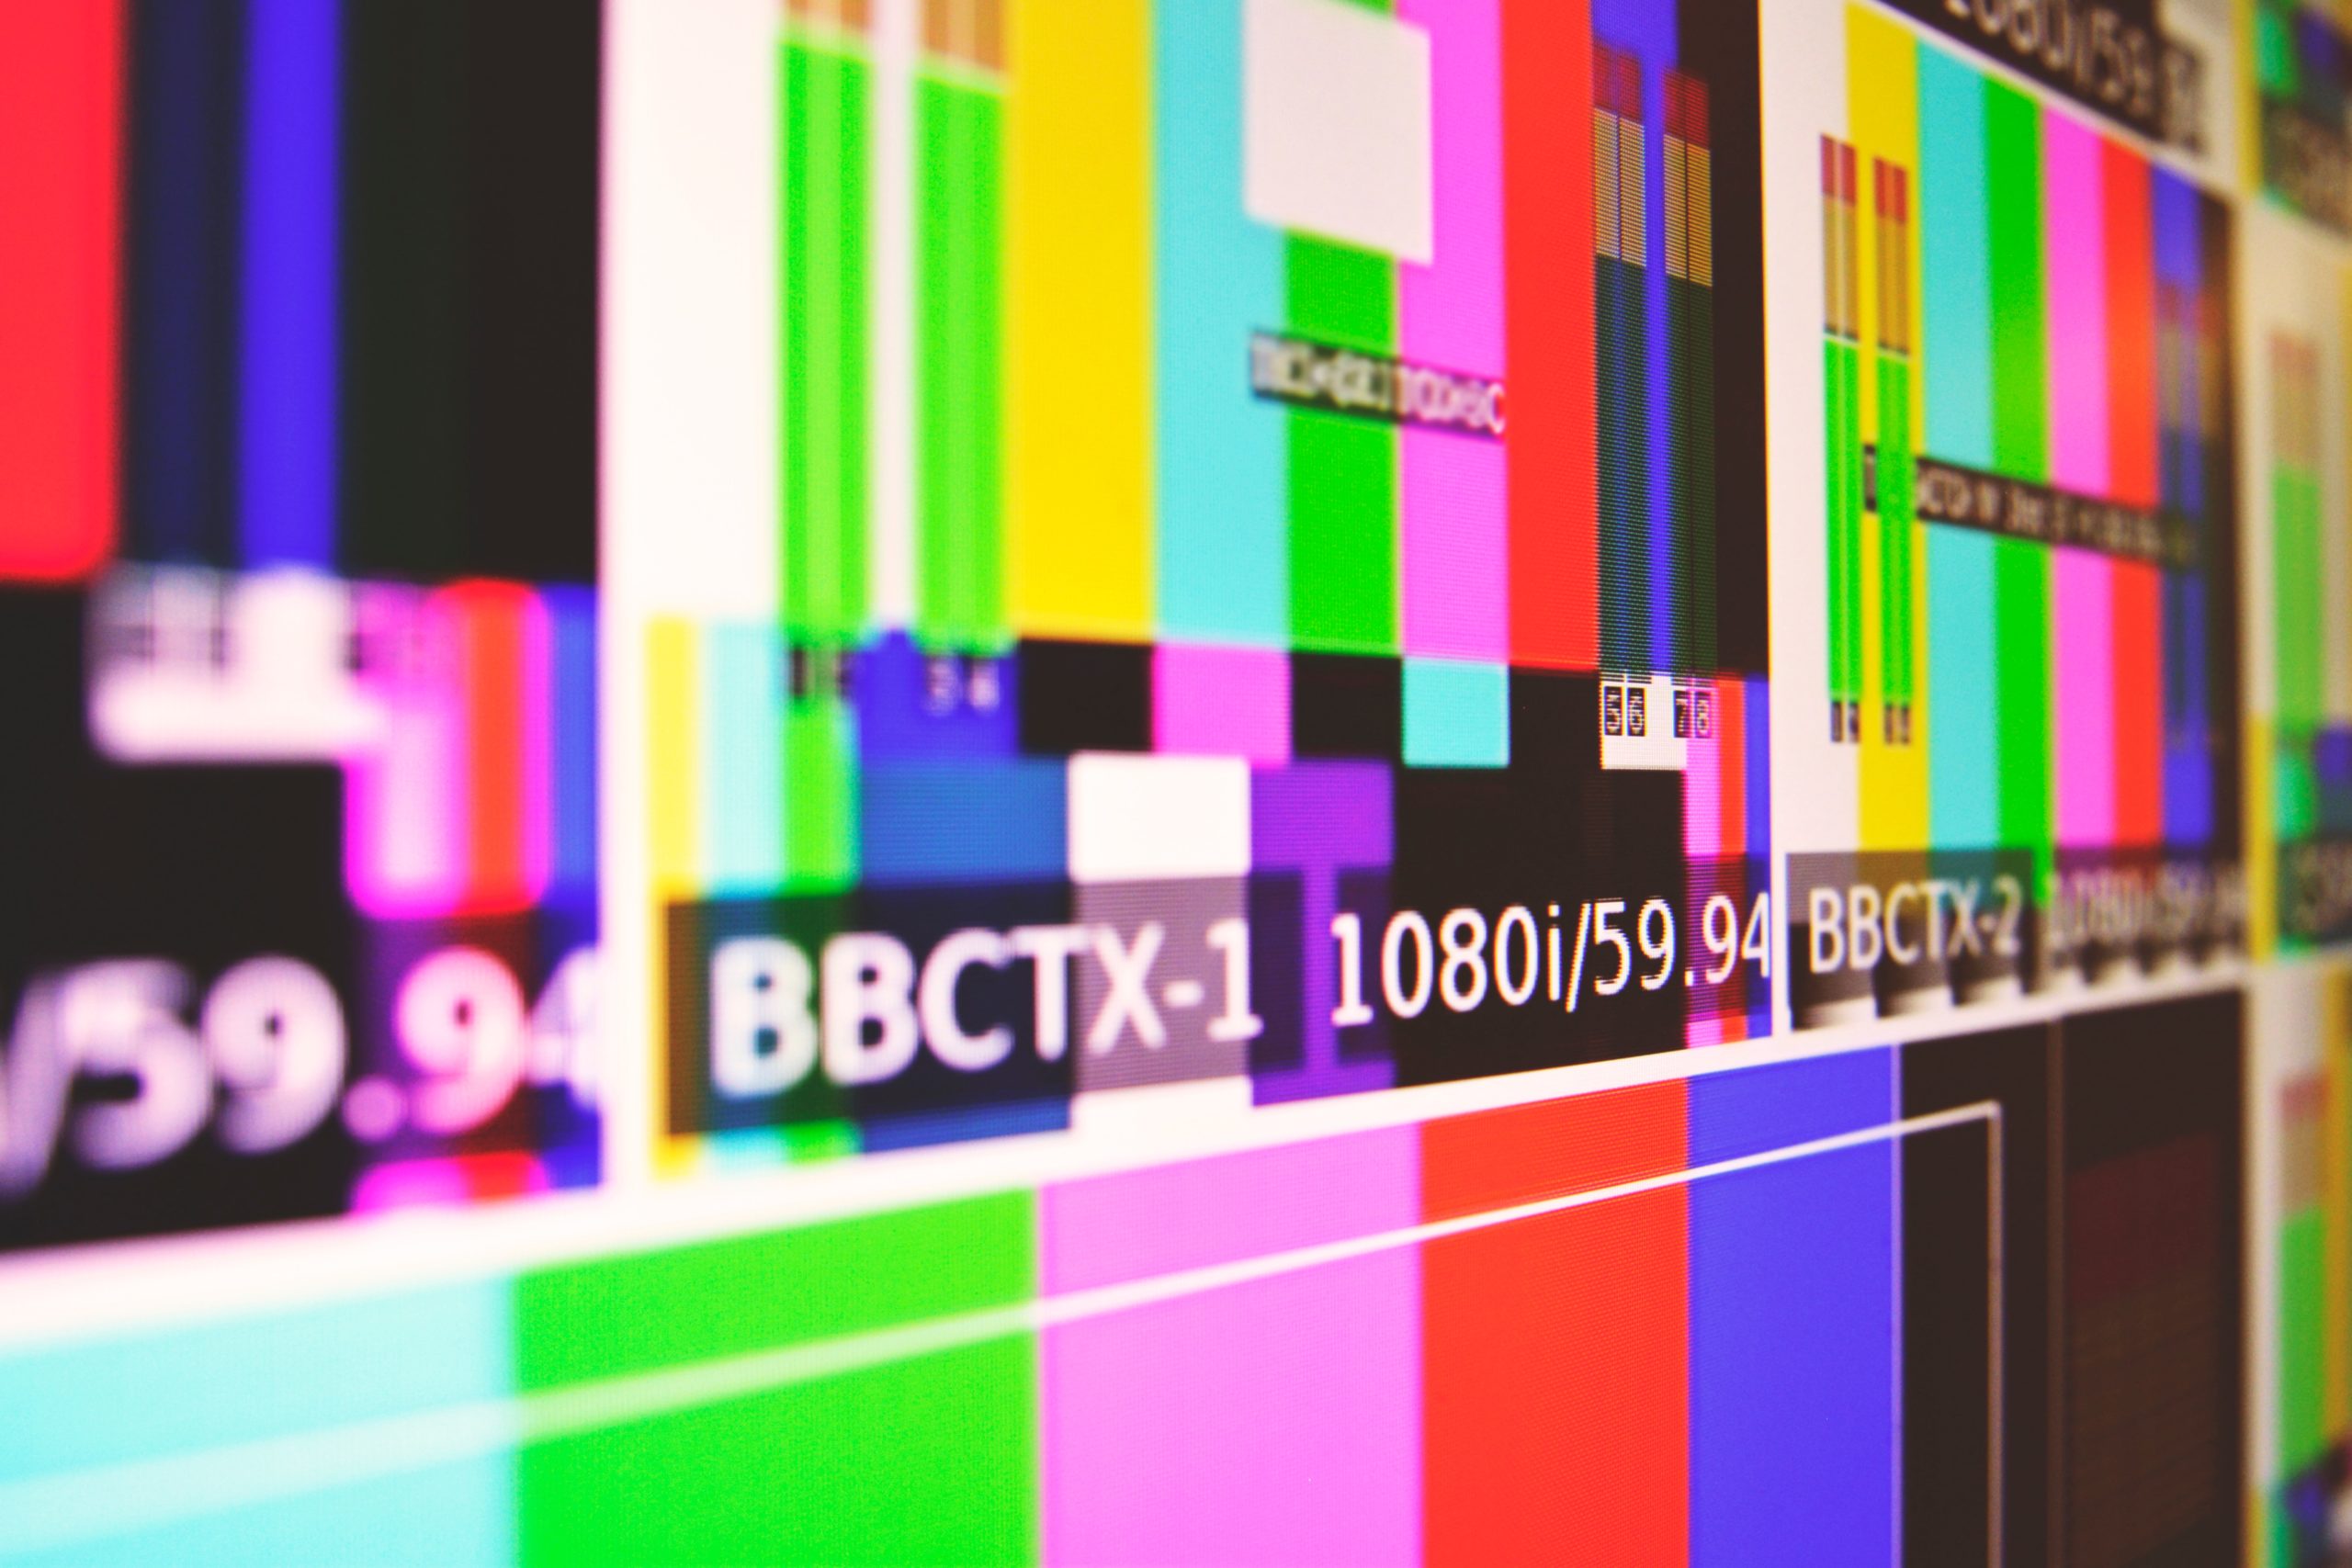 Television screen featured image for Bitcoin piece